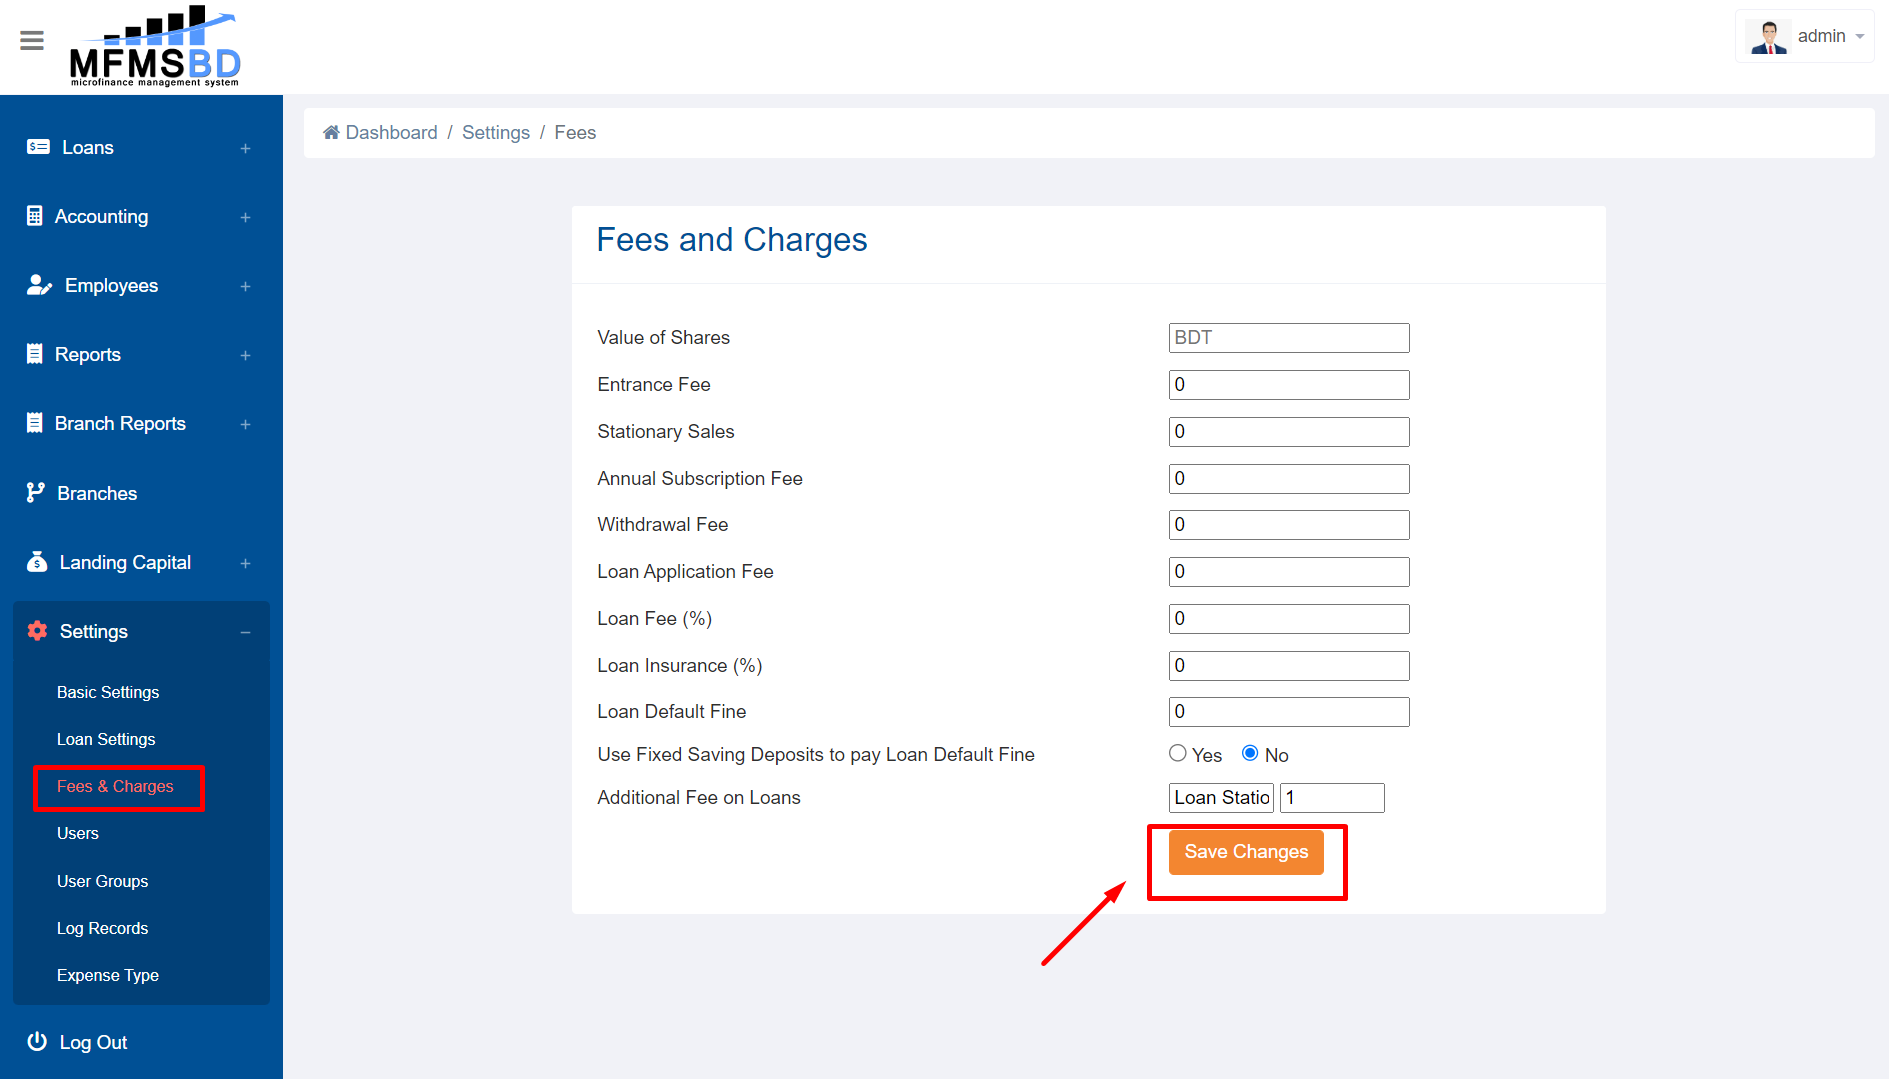 Fees & Charges Settings